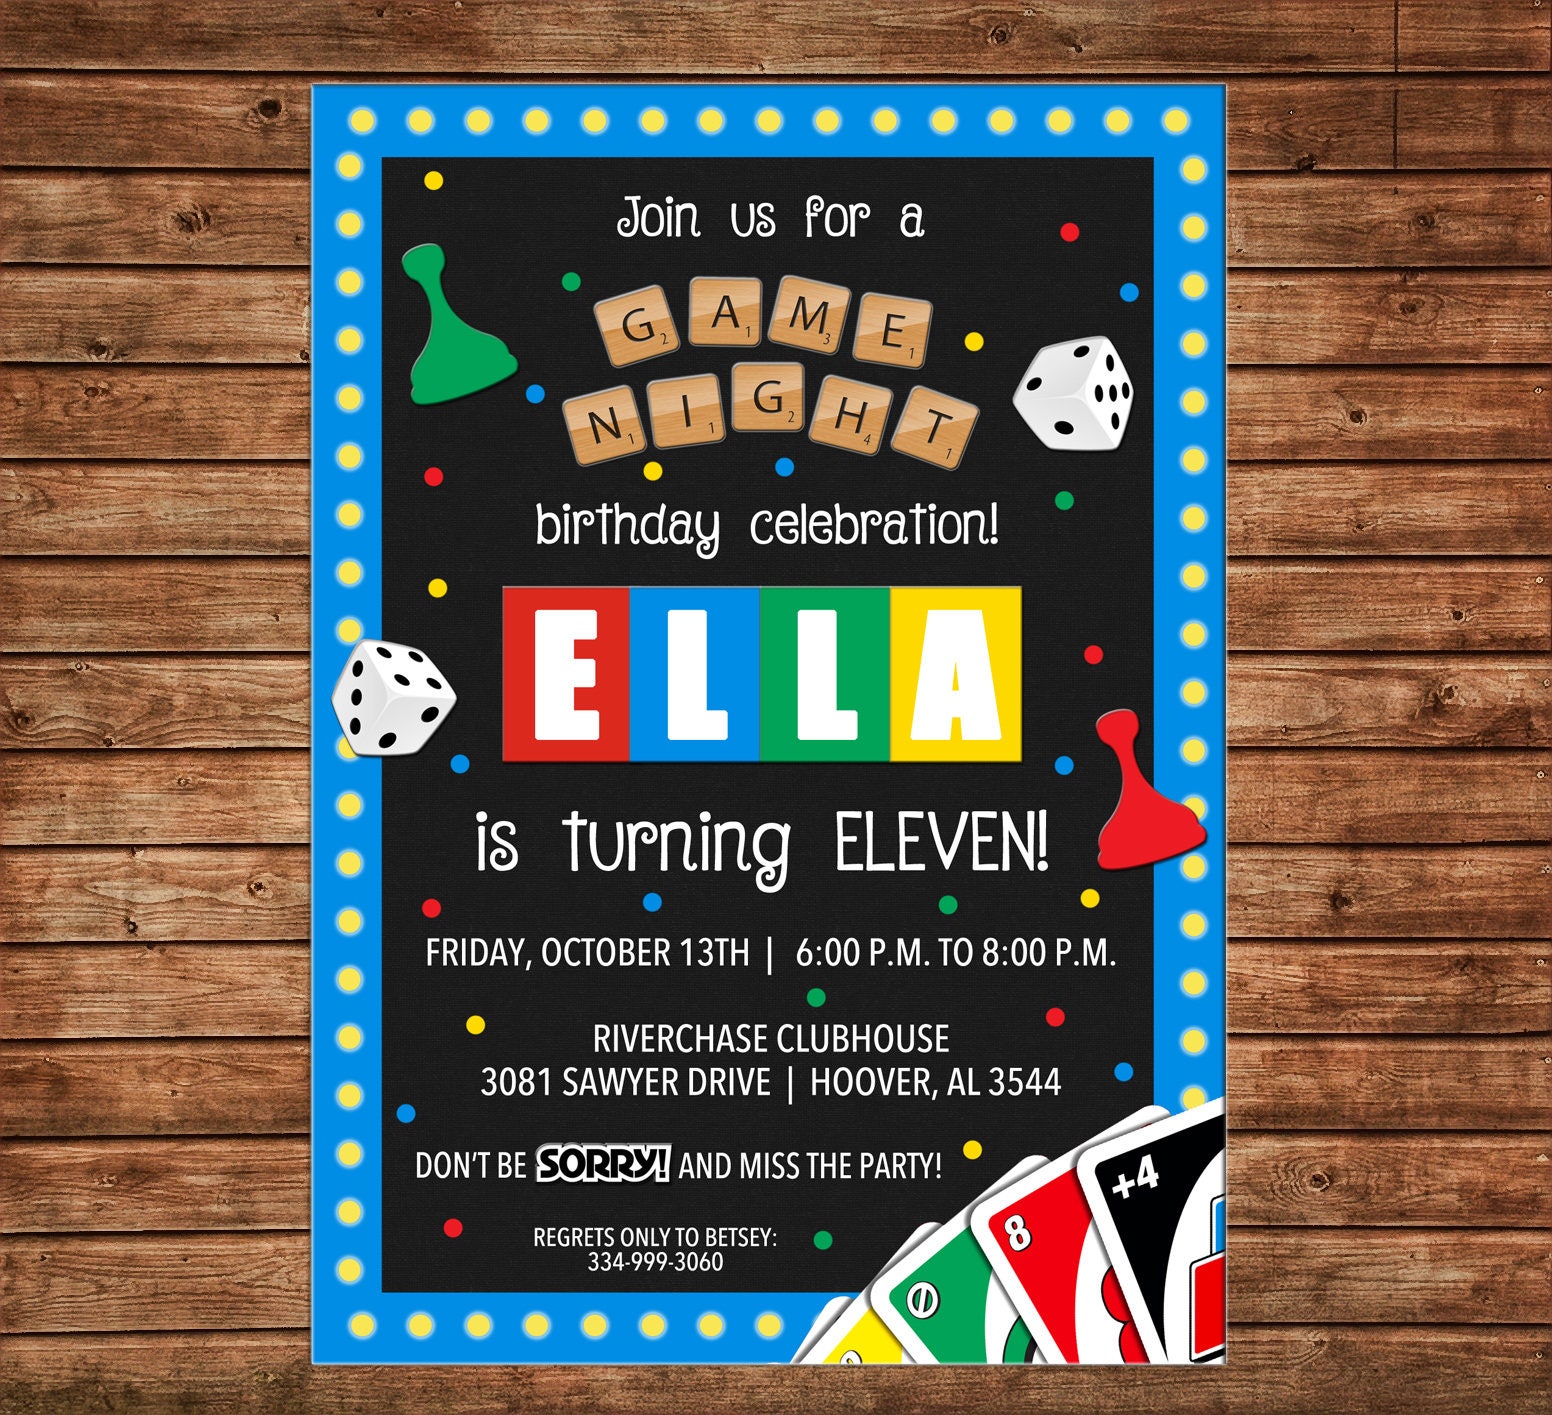 boy-or-girl-invitation-board-game-cards-game-night-birthday-party-can